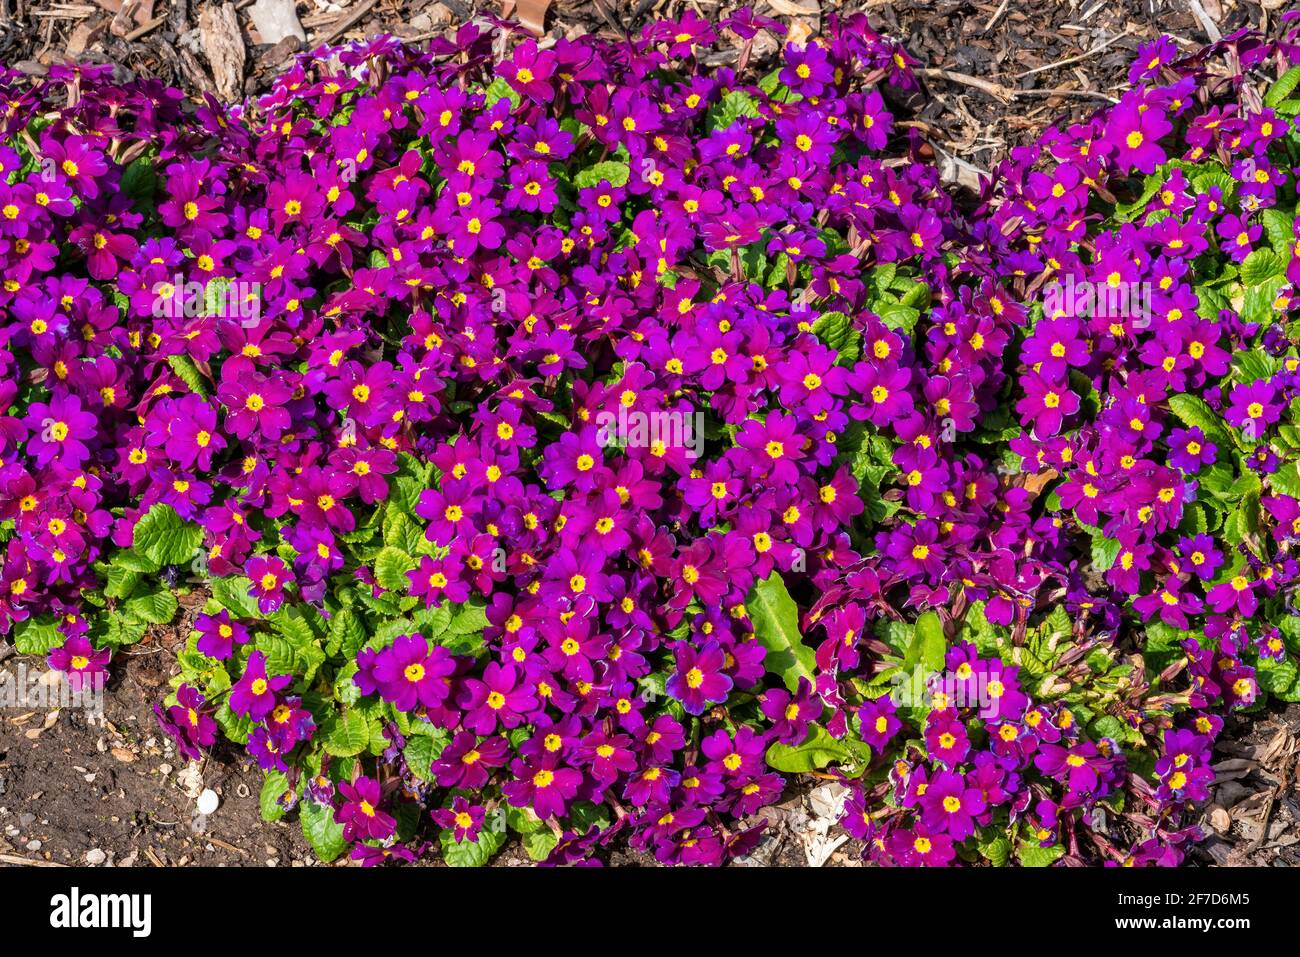 Primrose 'Wanda' (primula x pruhonicensis) a spring flowering plant with a red to purple springtime flower between February and May, stock photo image Stock Photo